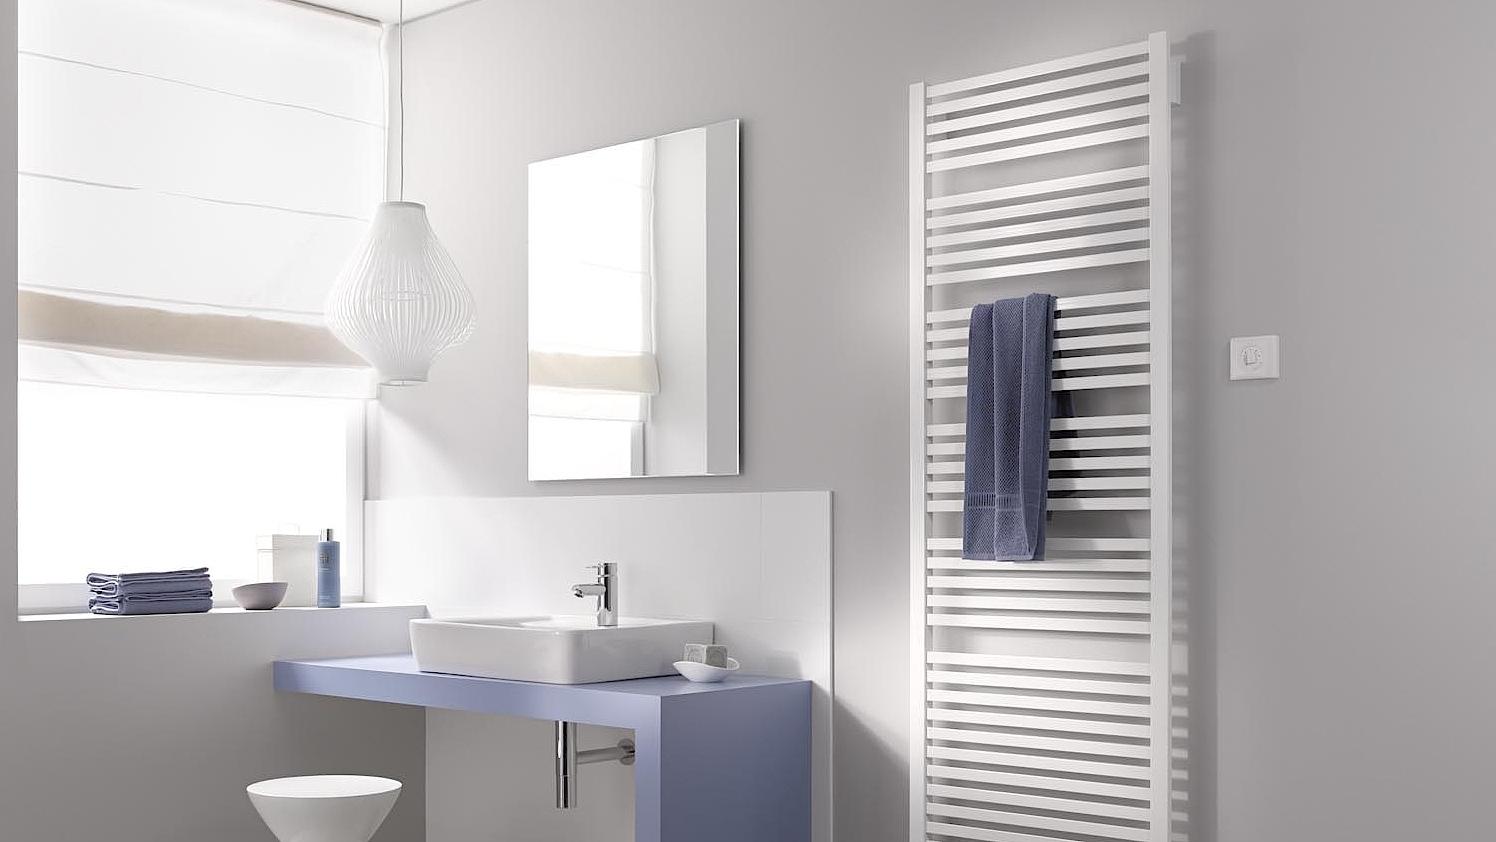 The Kermi Geneo quadris design and bathroom radiator is also available in an electric version.